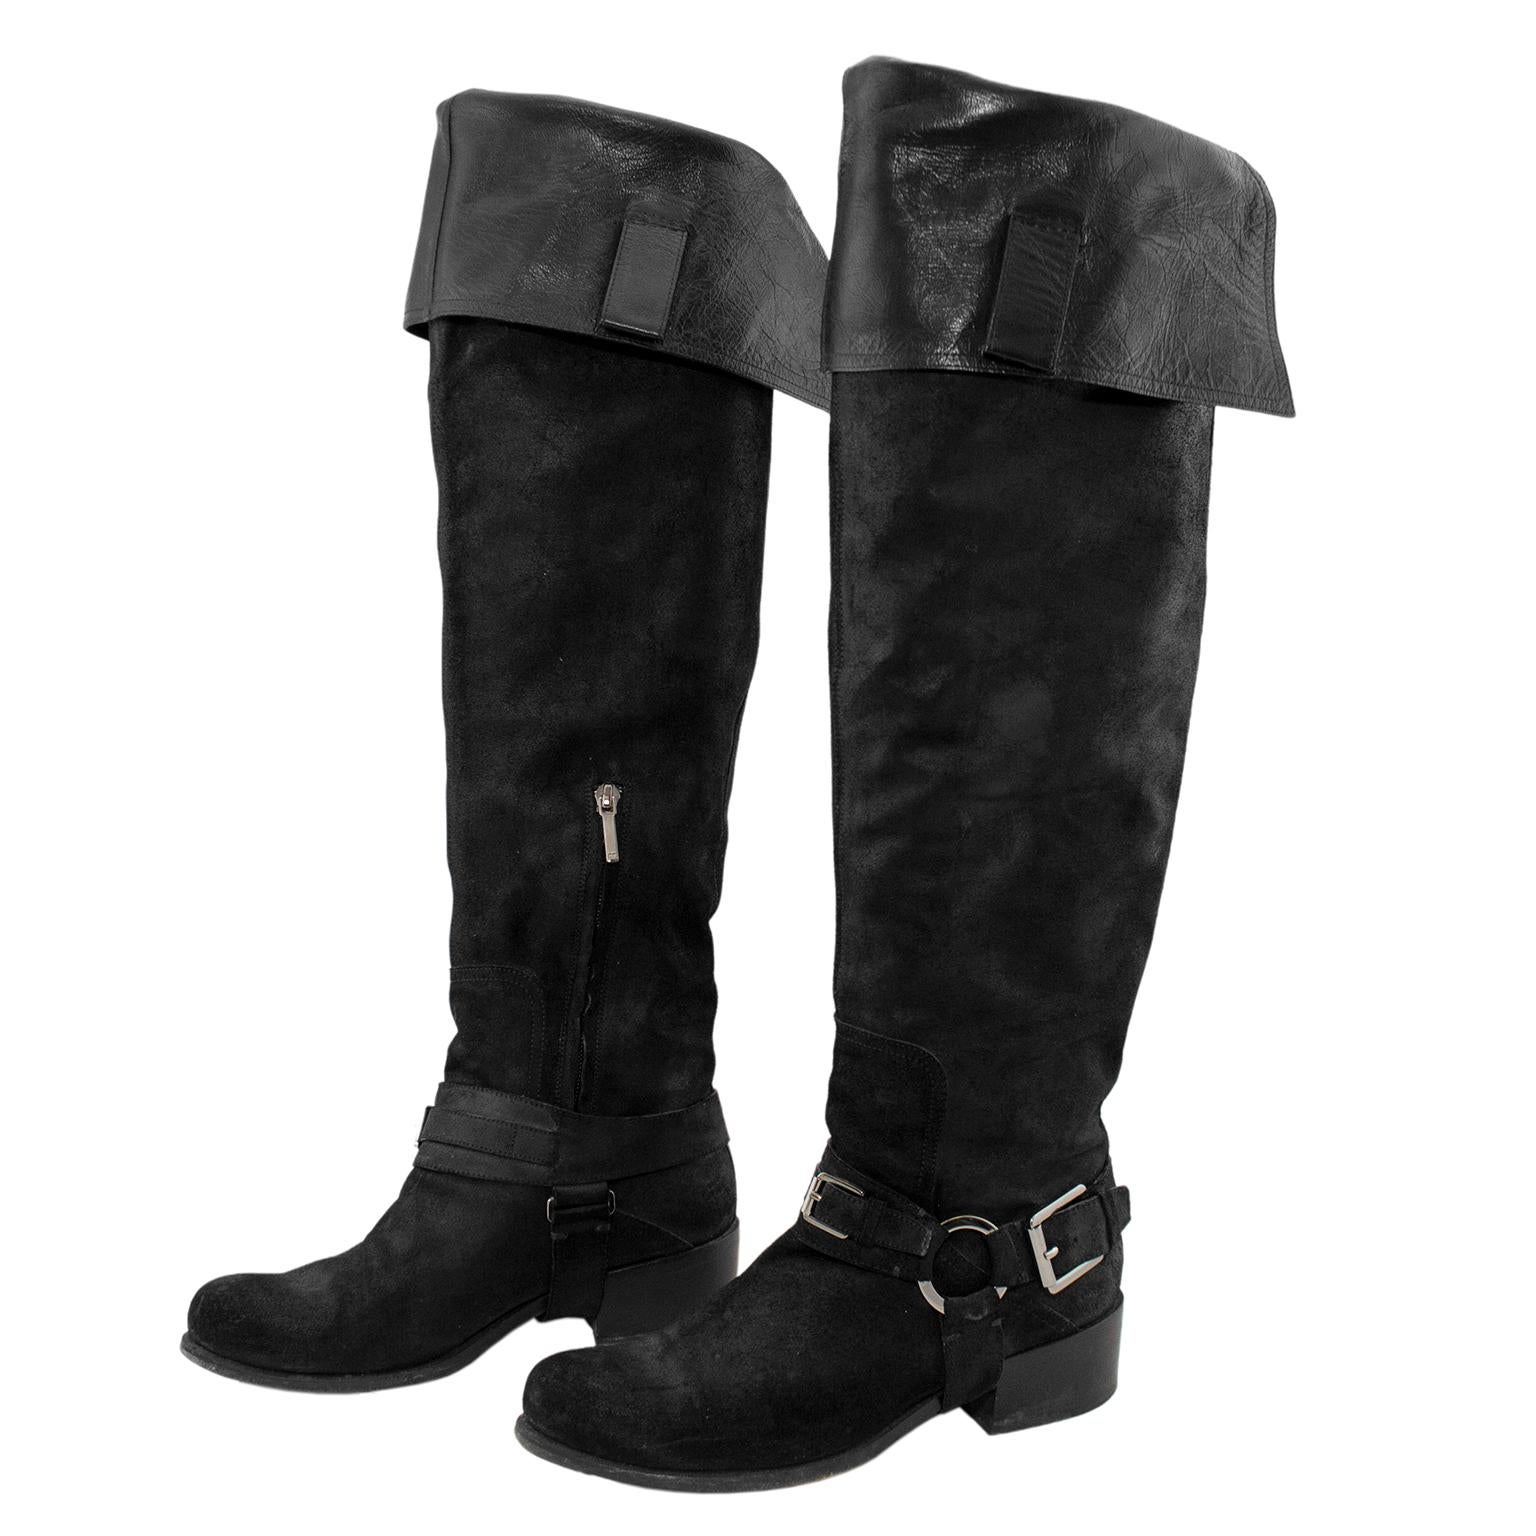 Chic black suede Dior over-the-knee buccaneer boots in excellent condition. Block heel on a heavy sole, wrap around straps and concealed inside zip closure, silver metal tone buckle and circular CD branded link. Heel 1.5